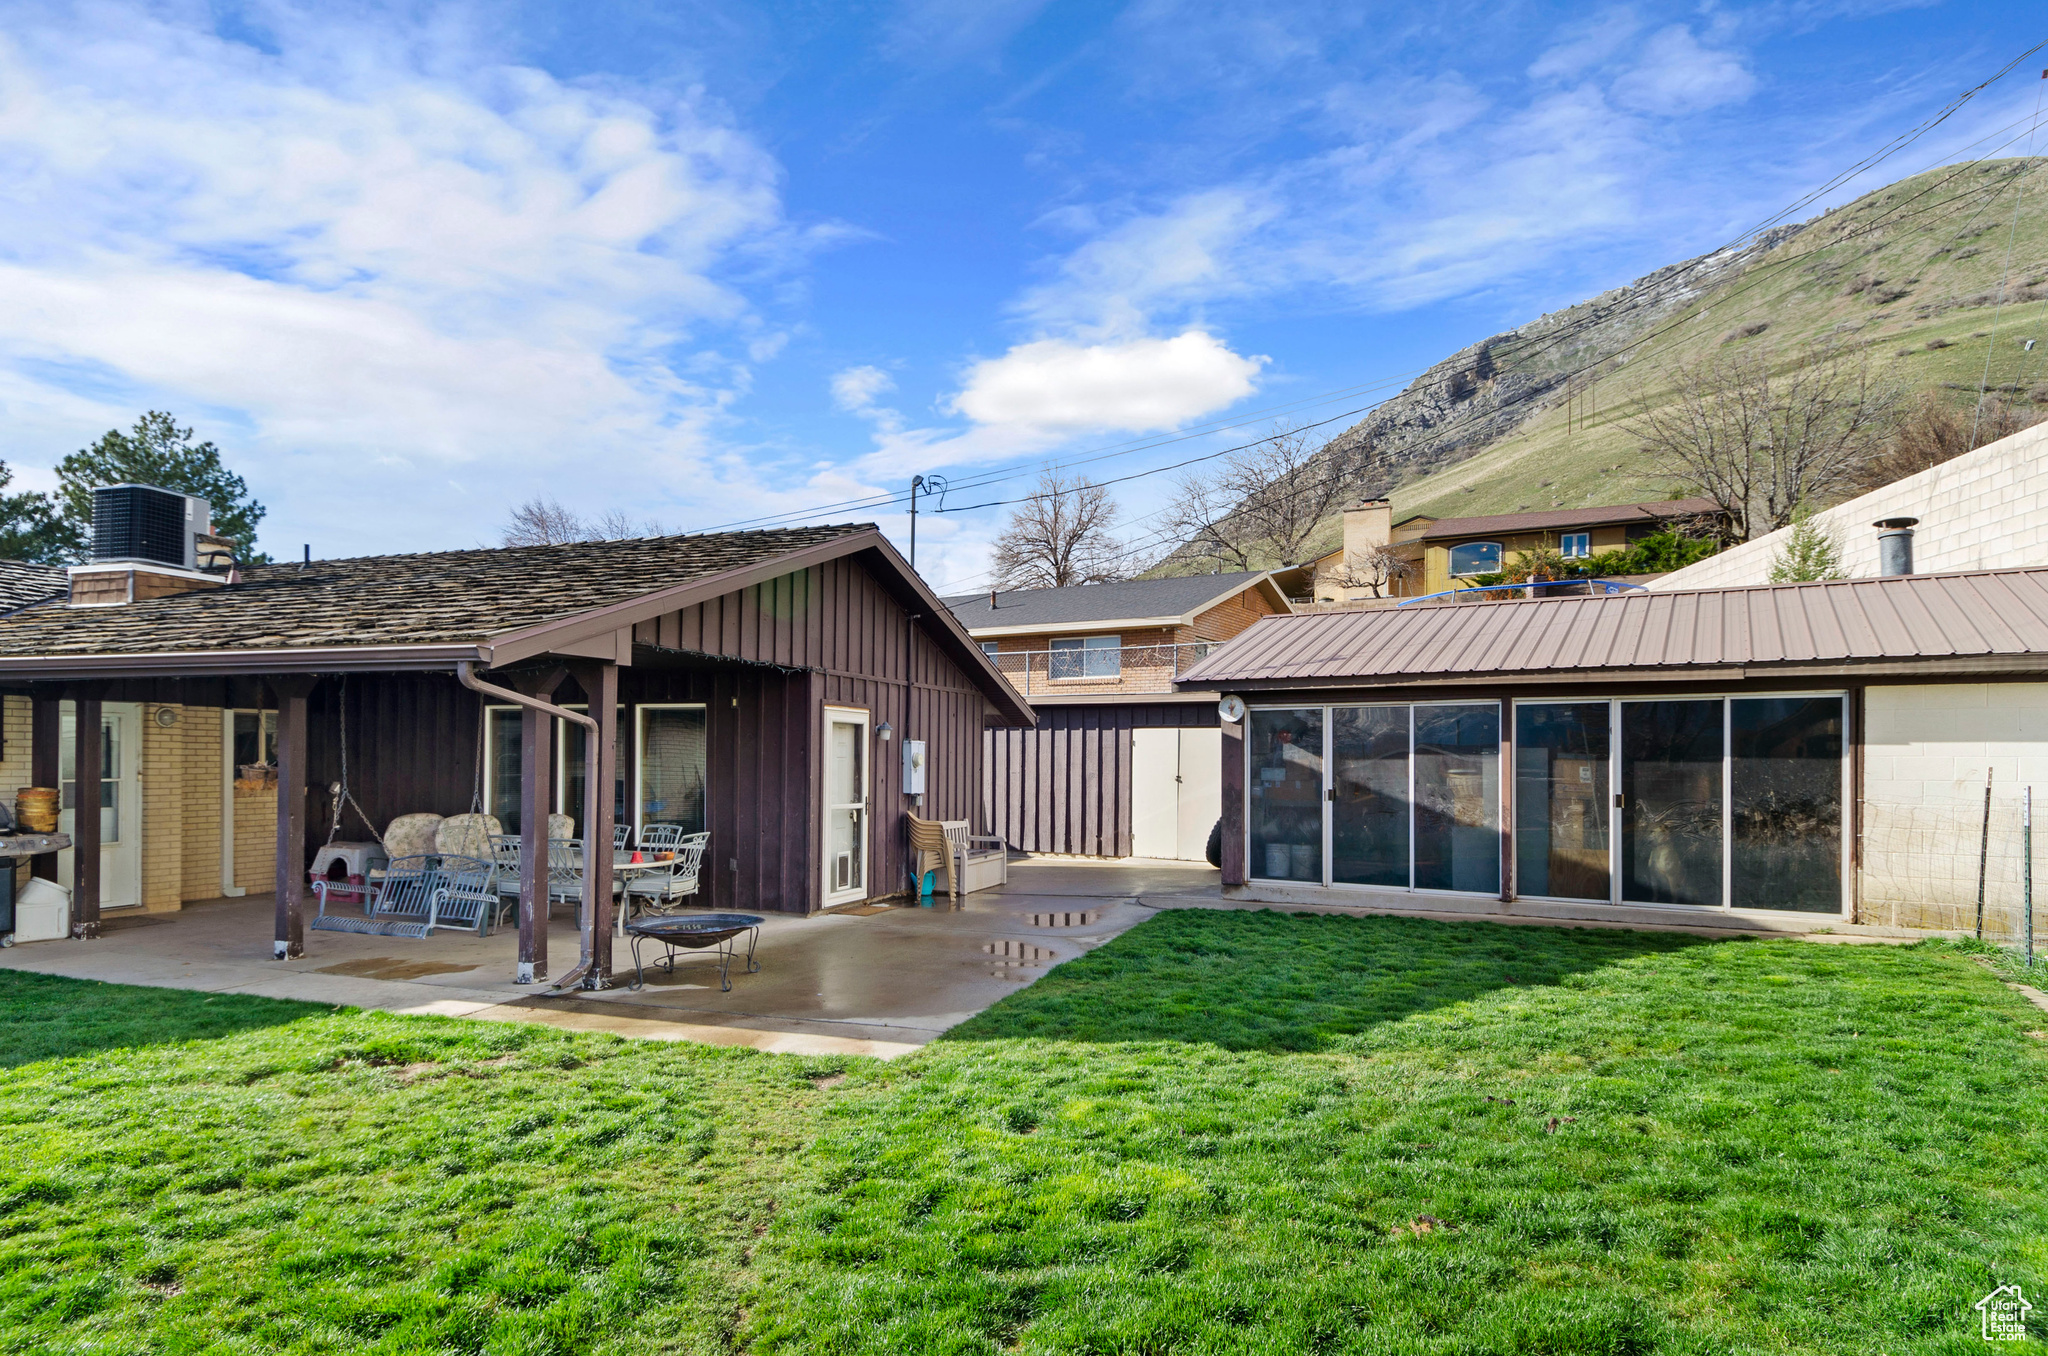 Back of property with a mountain view, lawn, patio, and a workshop.